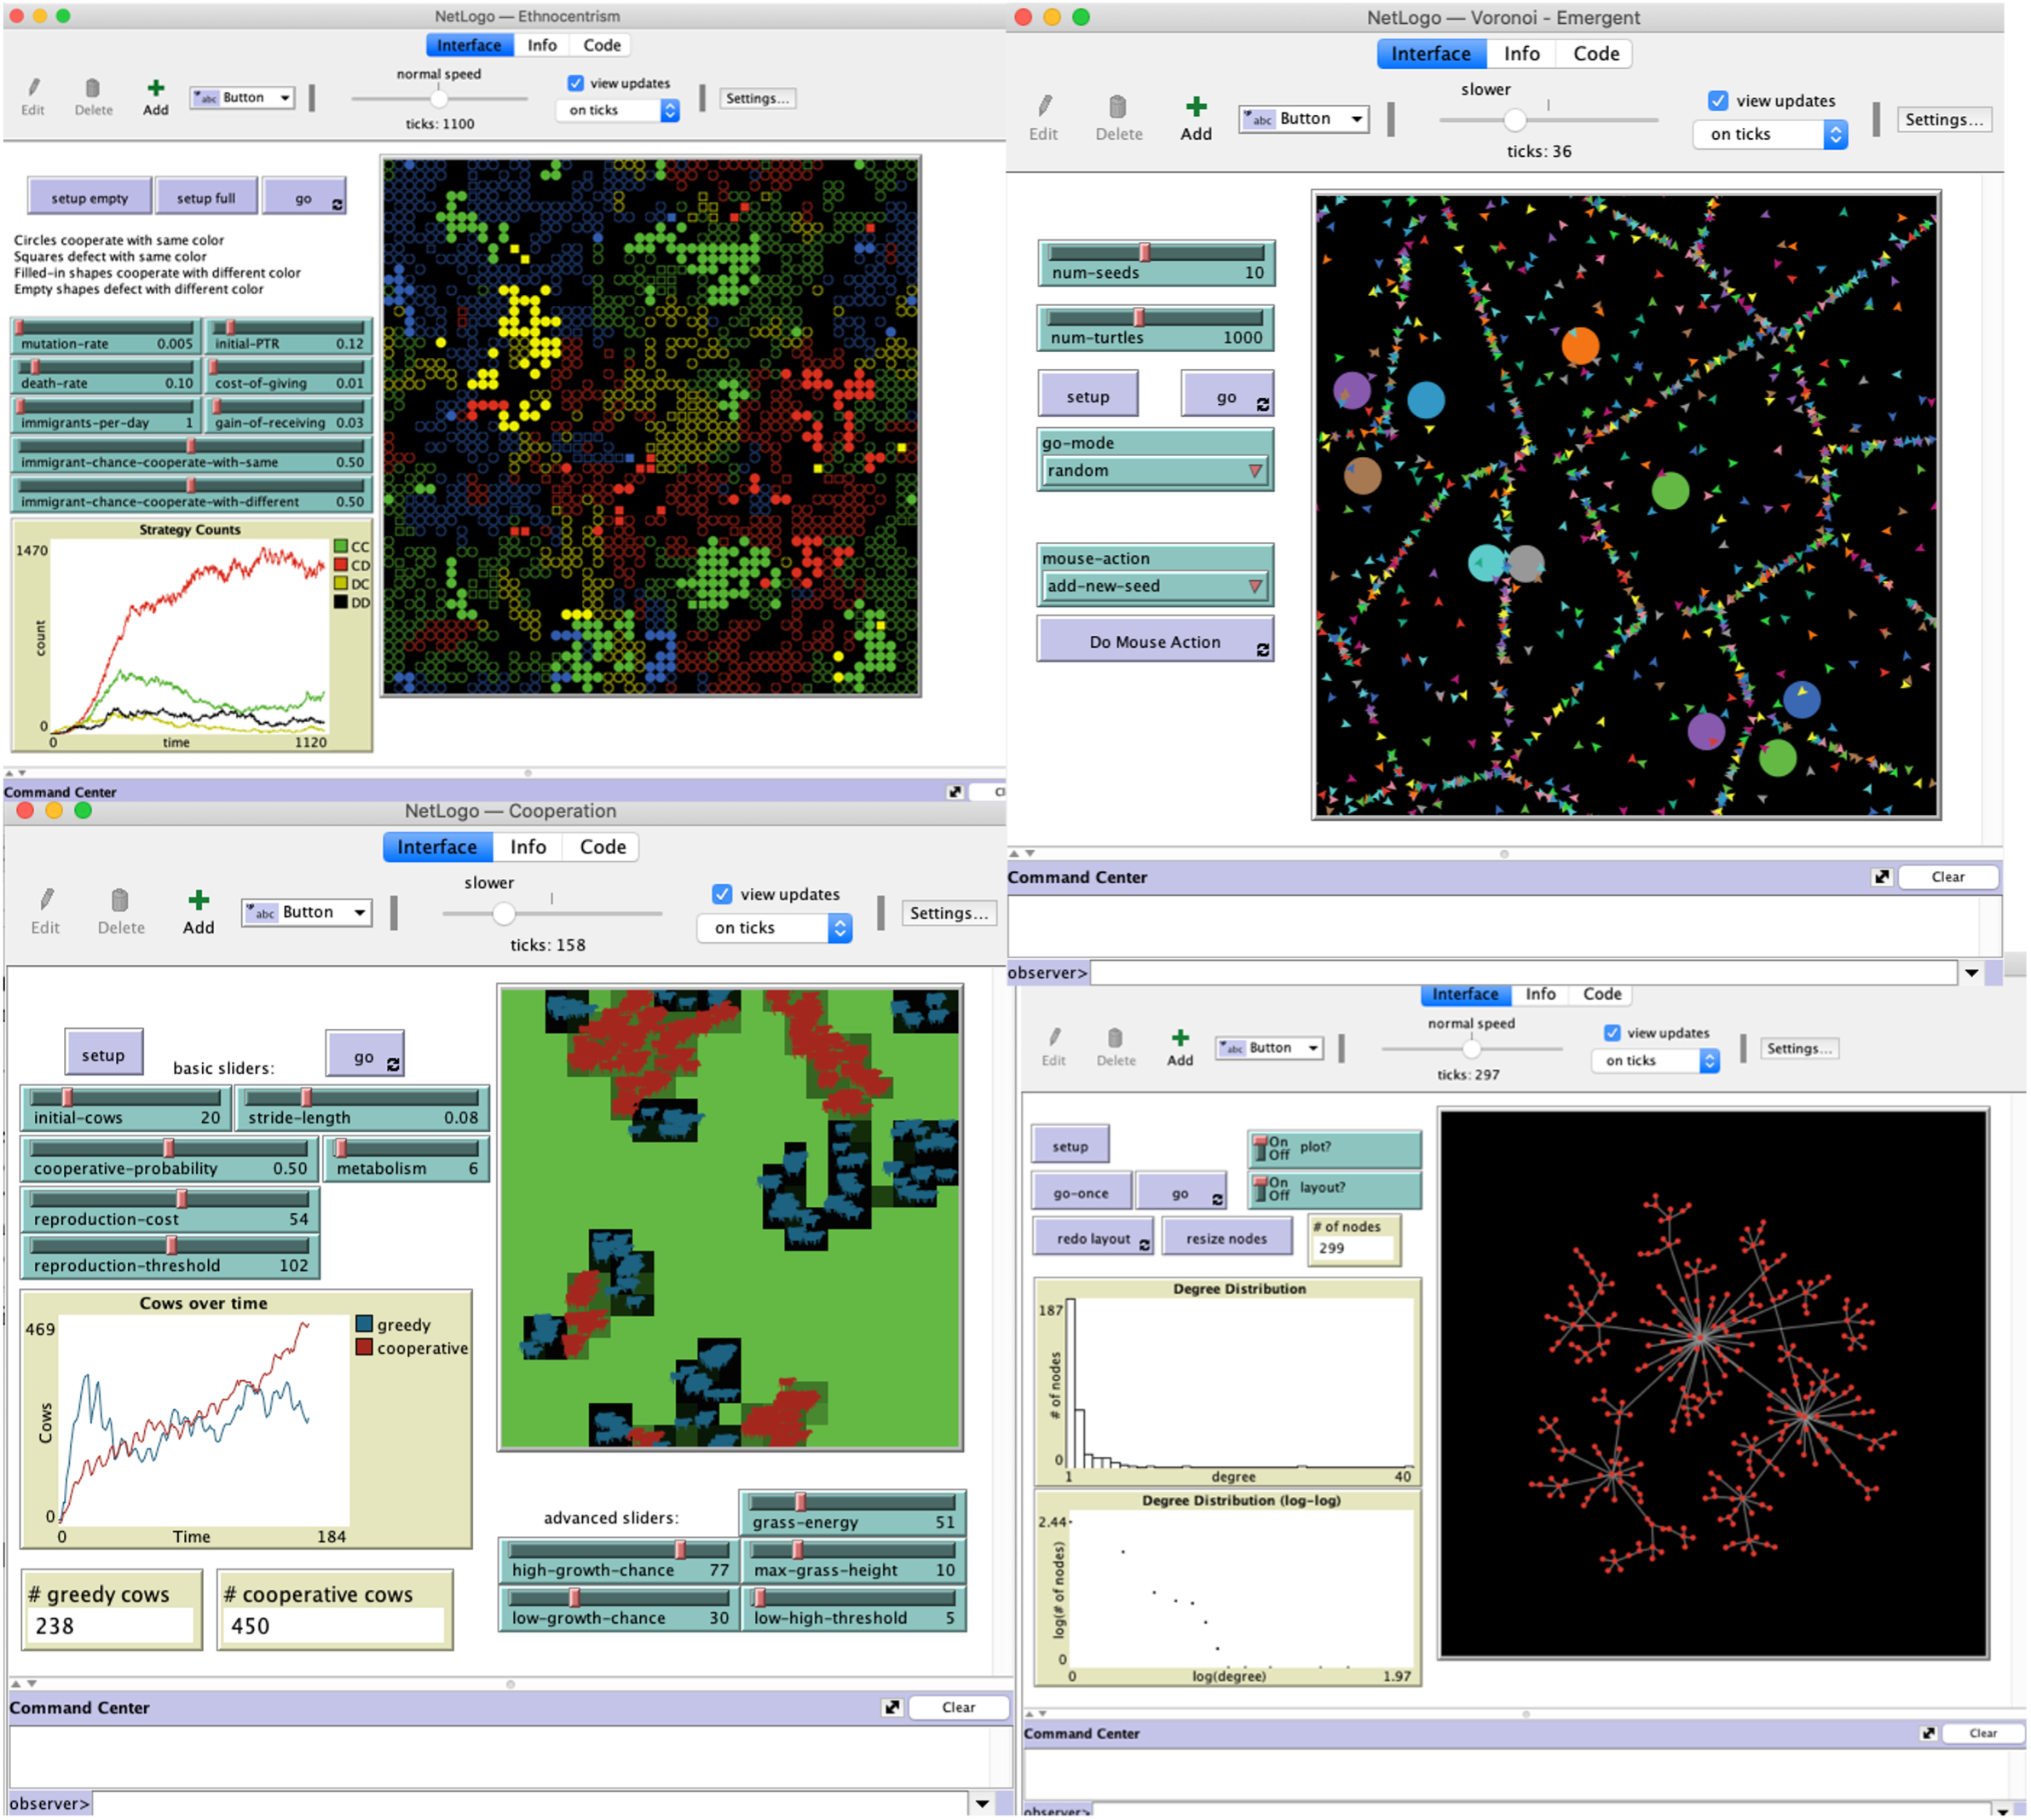 Models from the NetLogo libraries (clockwise from top left): Ethnocentrism (Social Sciences), Voronoi-Emergent (Mathematics), Preferential Attachment (Networks), Cooperation (Social Science and Evolution)